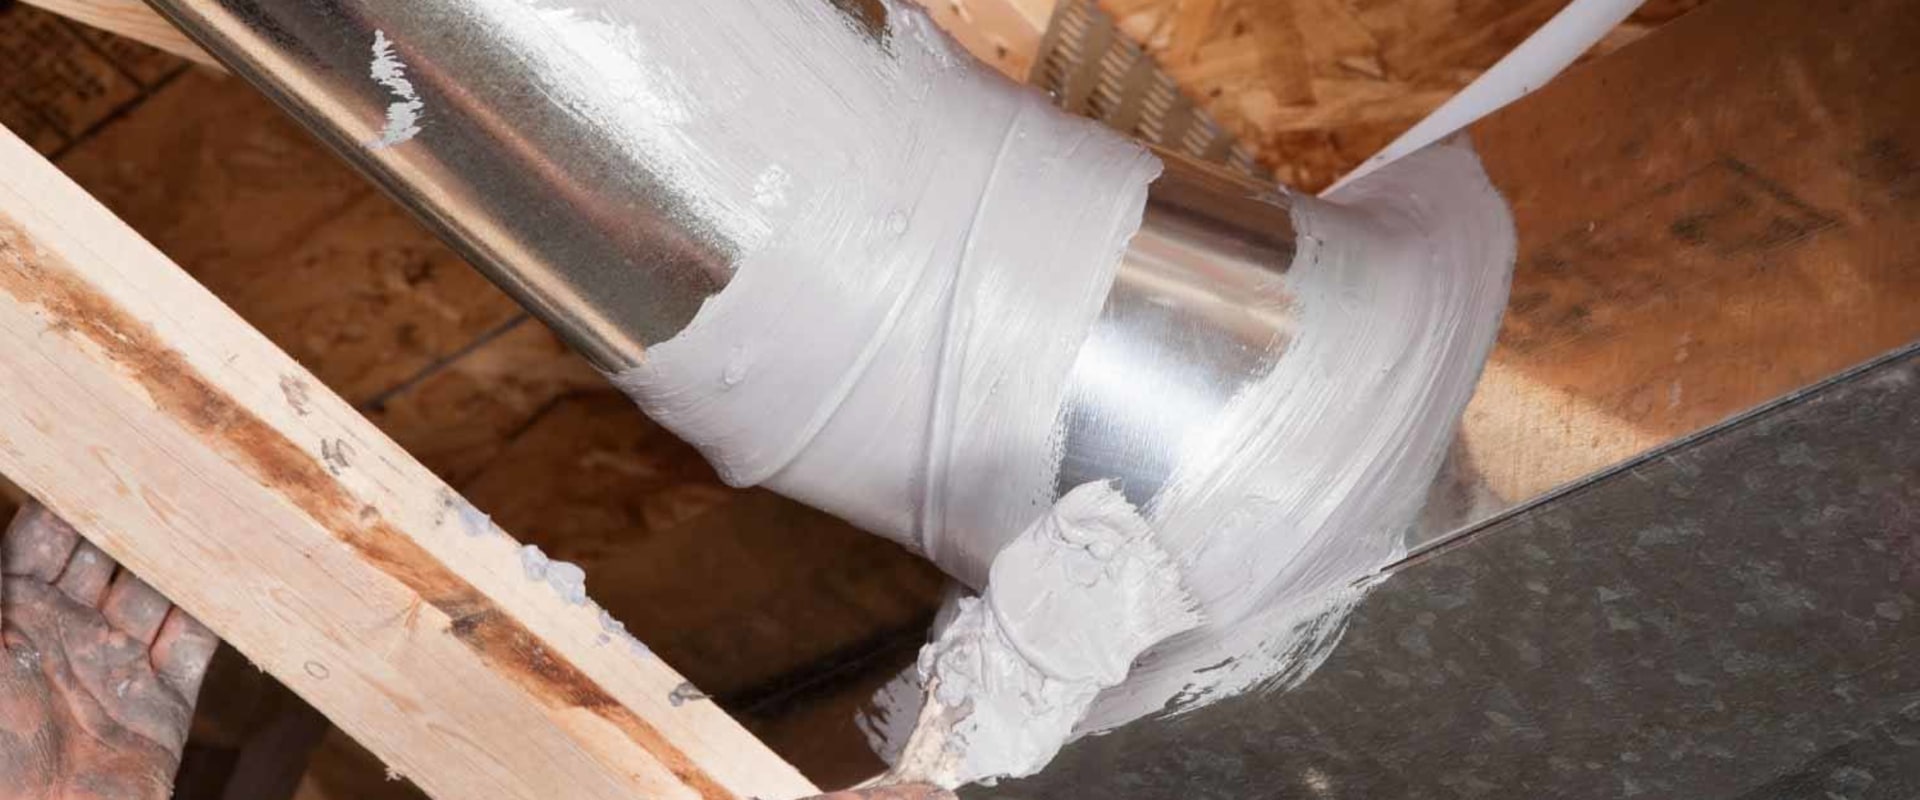 Does Duct Sealant Harden? An Expert's Guide to Sealing Air Ducts